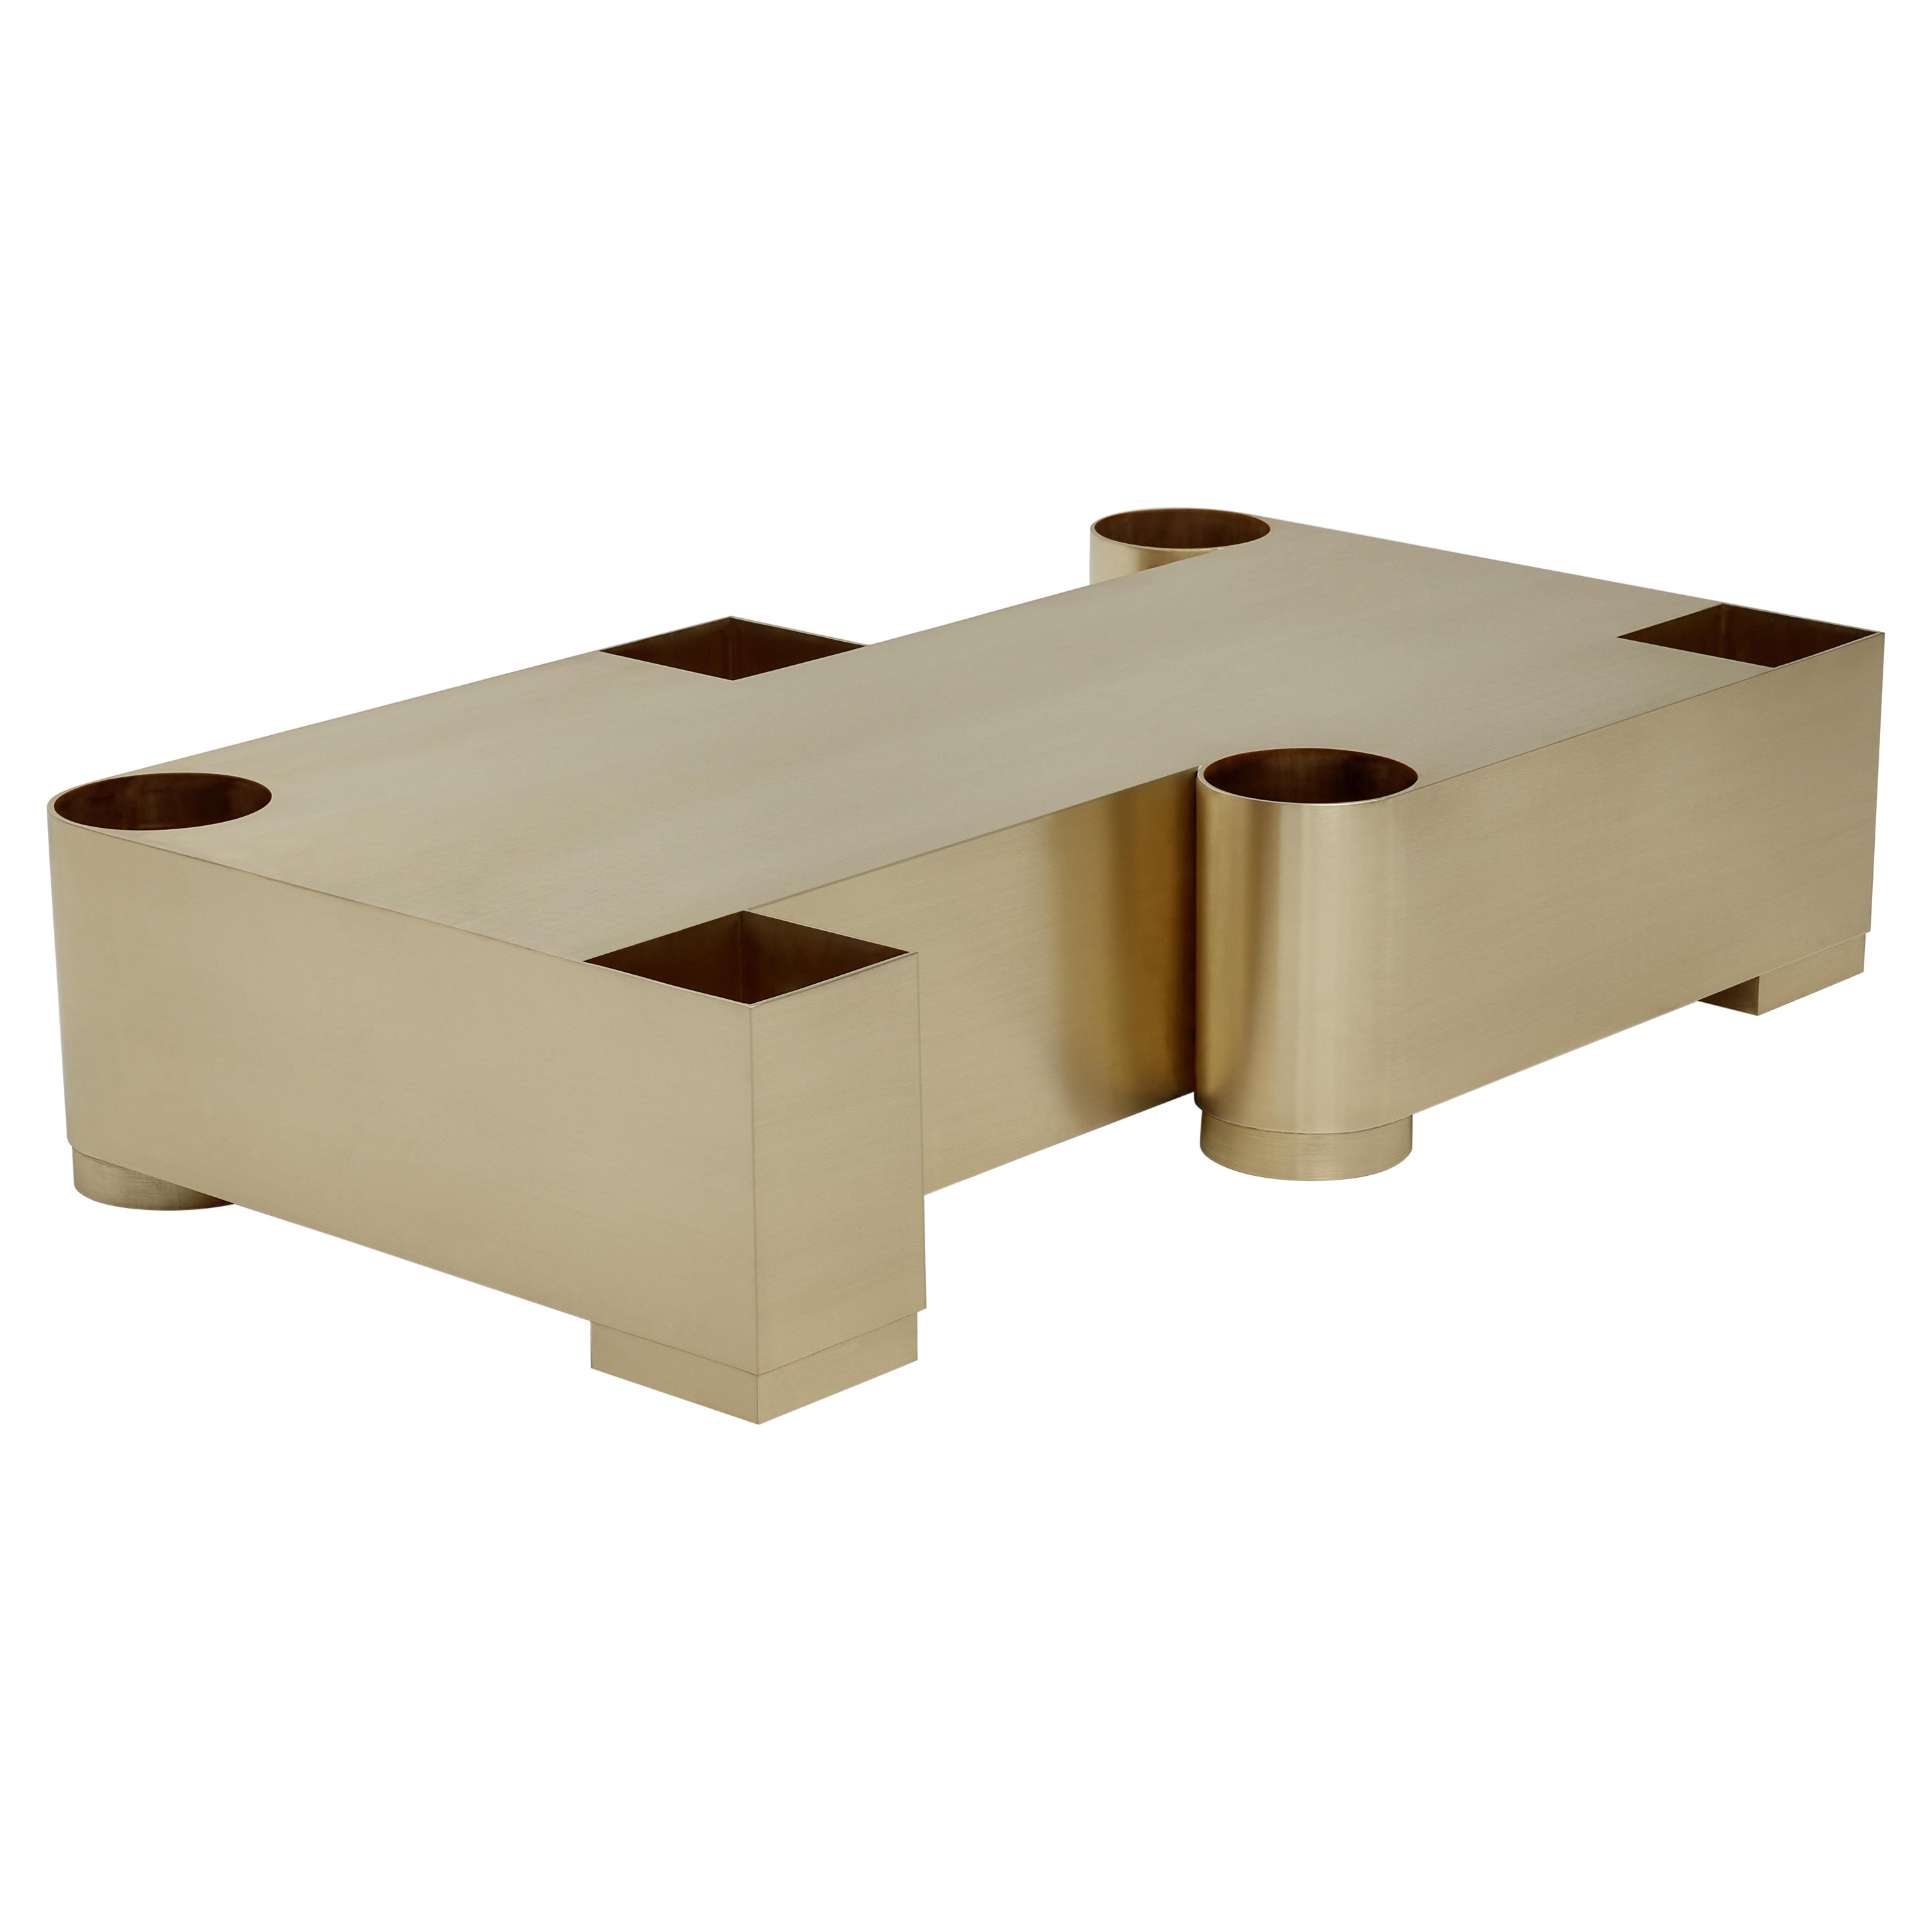 Contemporary Coffee Table 'Equation' by Marta Delgado, Brushed Brass